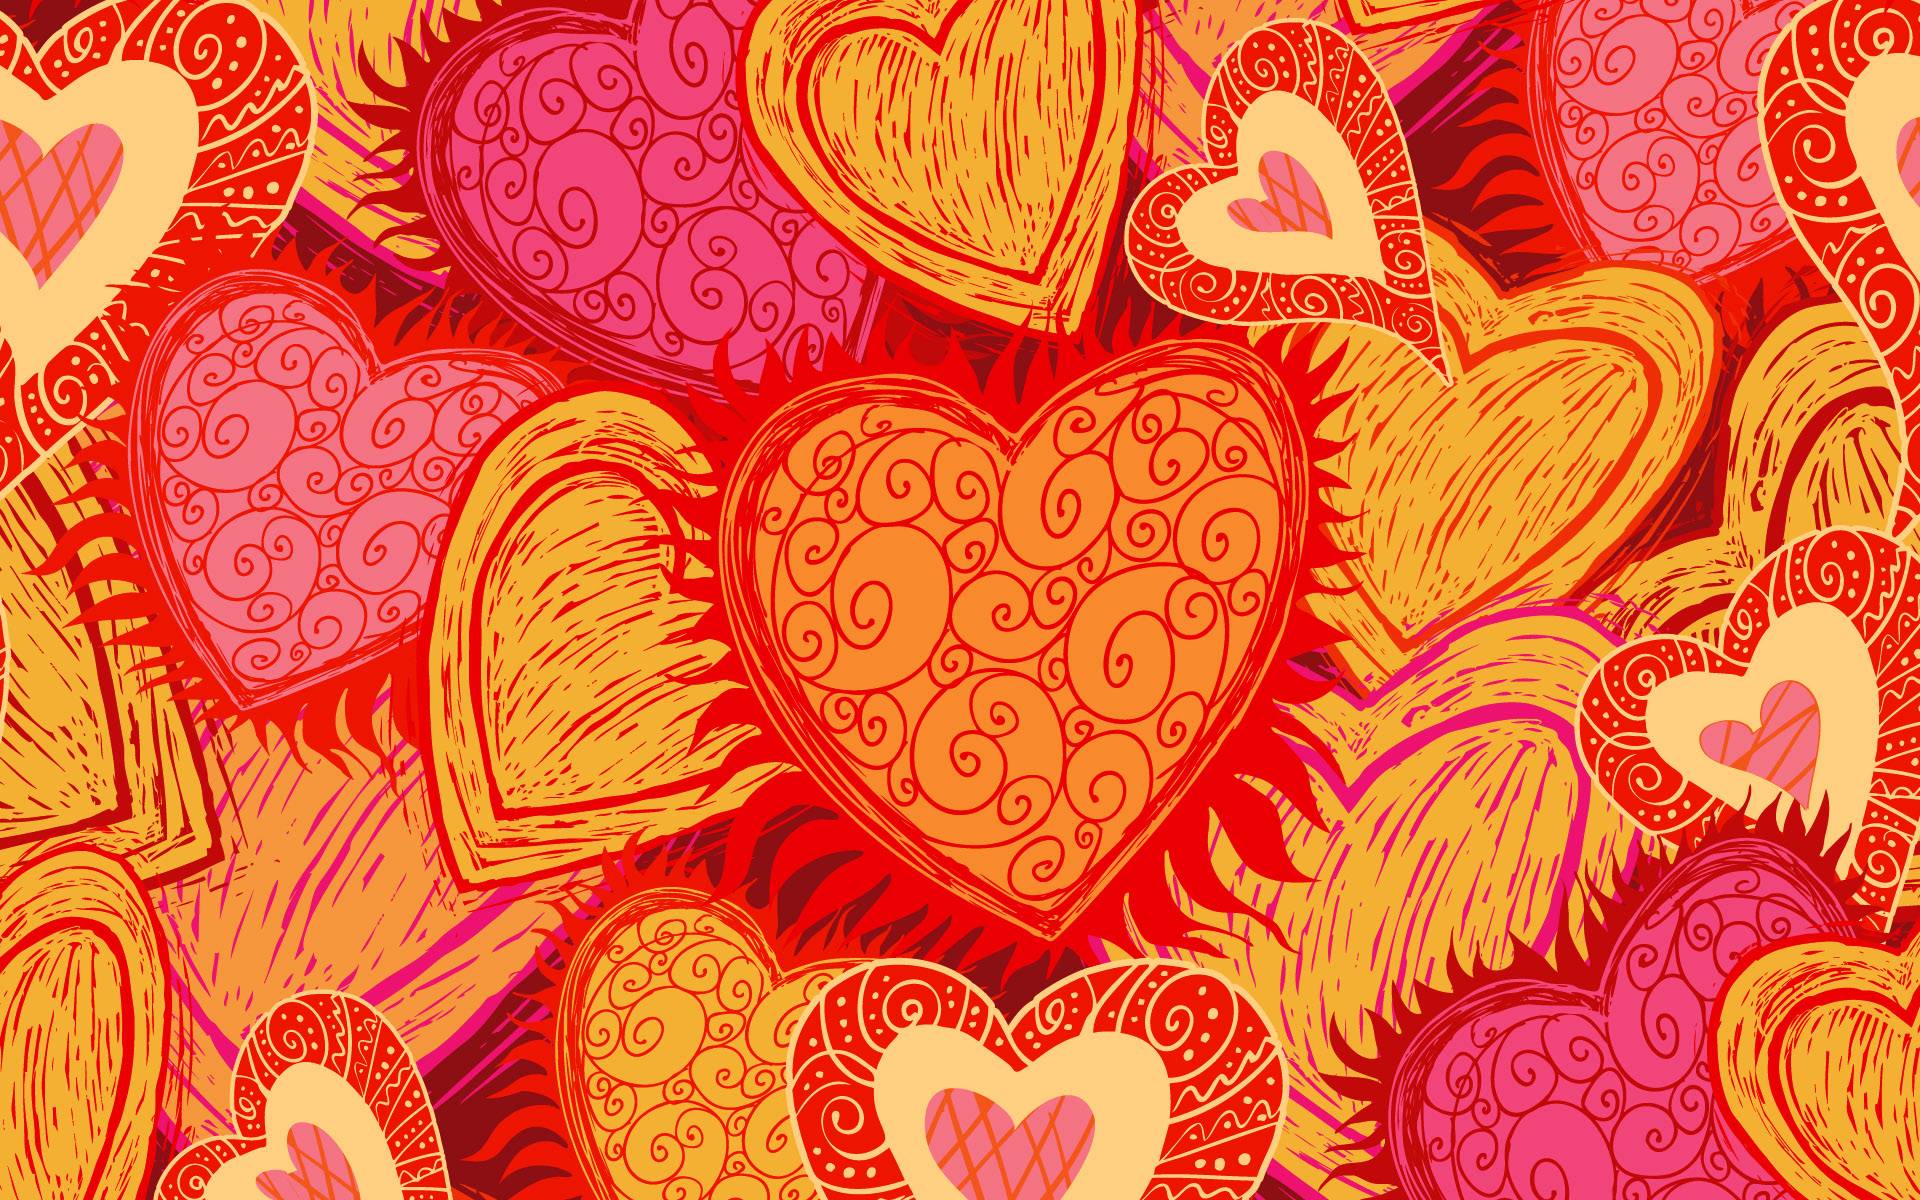 Valentines Day Hearts Wallpaper. Home Concepts Ideas